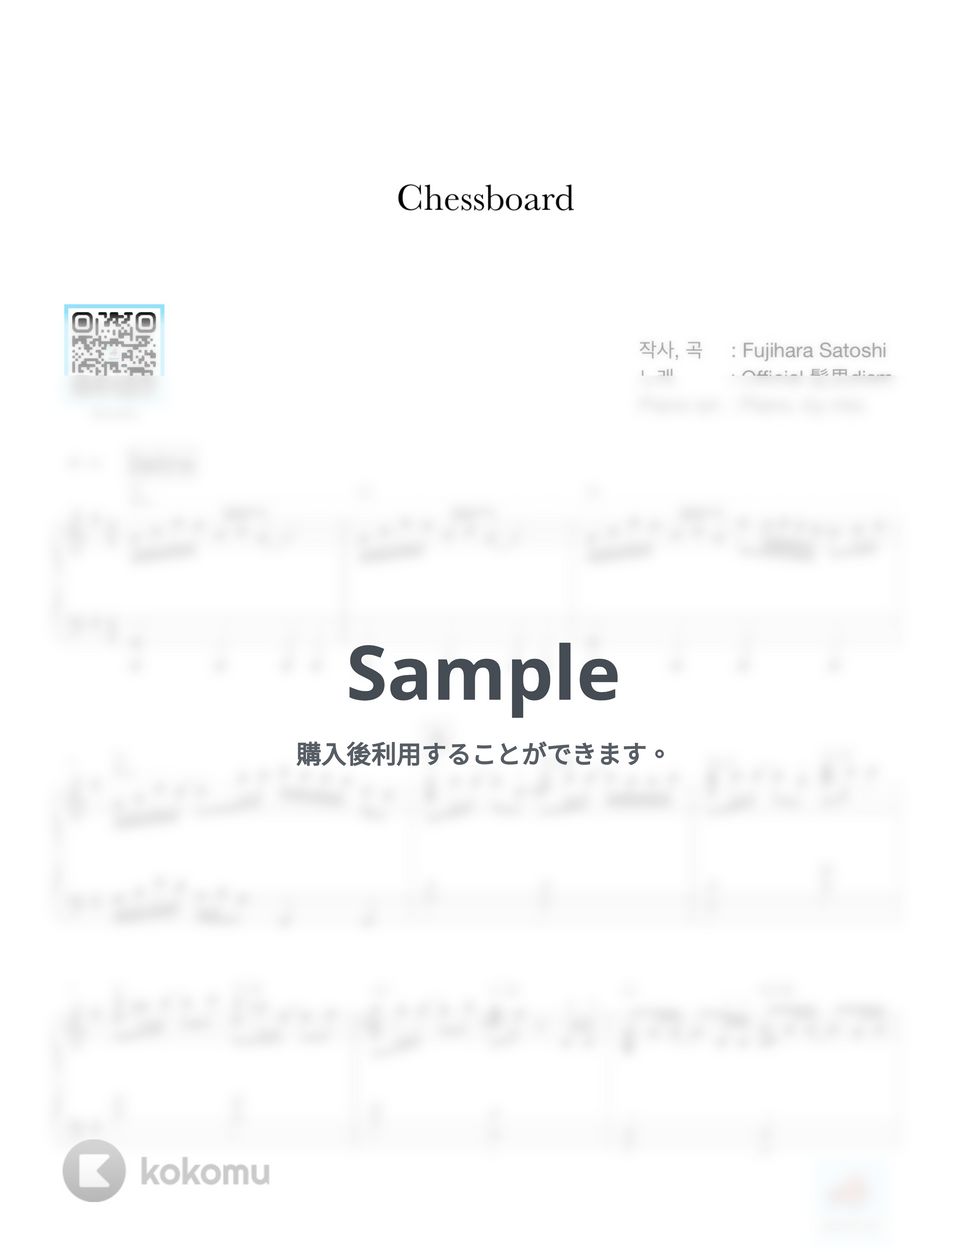 Official髭男dism - ChessBoard by Piano. by mio